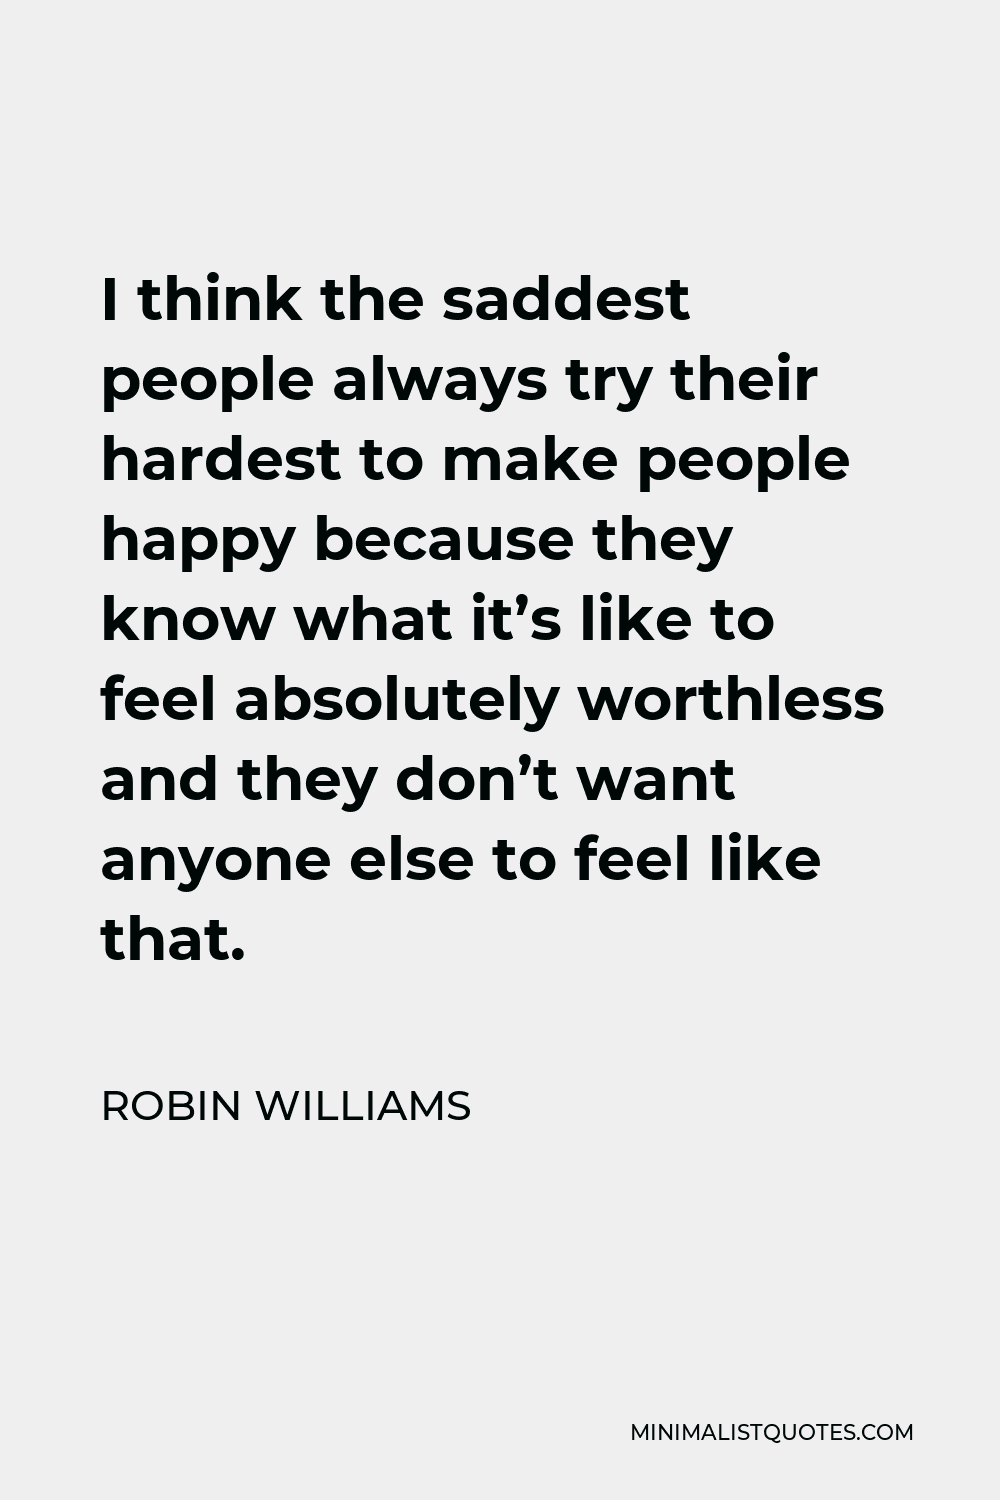 Robin Williams Quote - I think the saddest people always try their hardest to make people happy because they know what it’s like to feel absolutely worthless and they don’t want anyone else to feel like that.